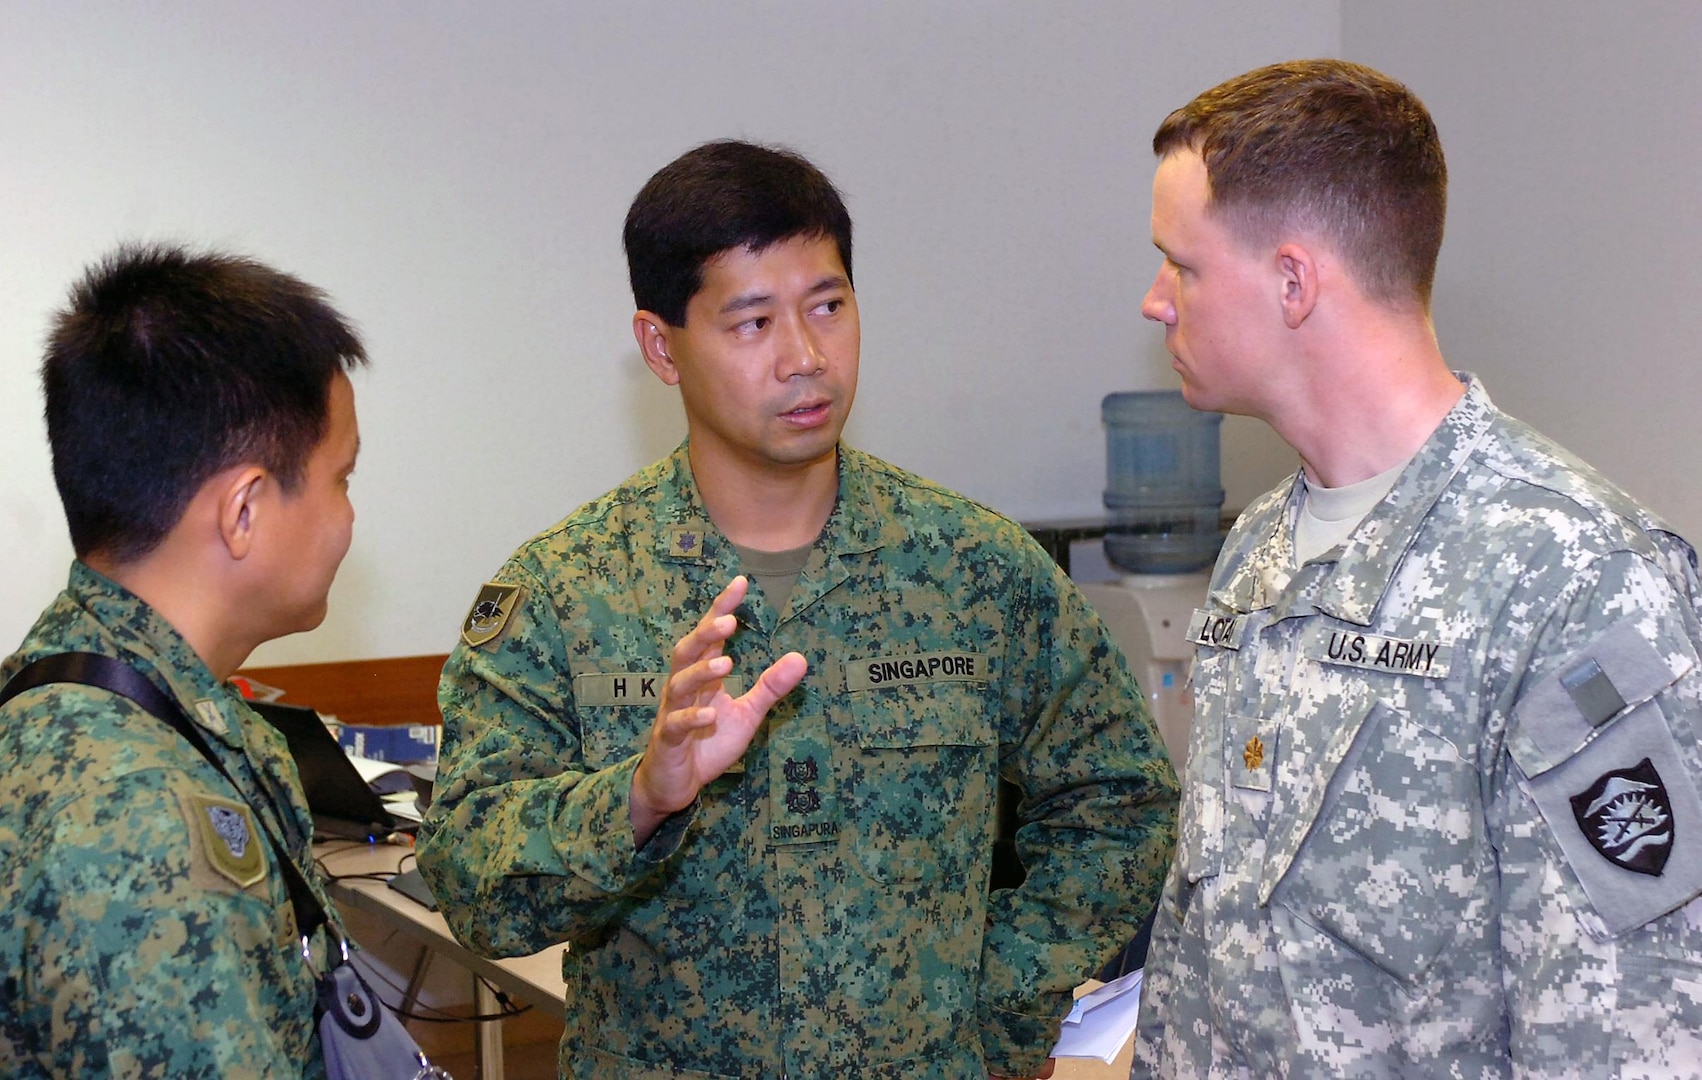 Lt. Col. Johnny Lee, deputy of operations for 9th Singapore Division (Infantry), discusses details of Tiger Balm with his U.S. counterpart, Maj. Joe Lontai, assistant operations officer for the 82nd Support Detachment of the Oregon Army National Guard June 13, 2010. Tiger Balm is an annual coalition training exercise between the Singapore Army and U.S. National Guard and Reserve Soldiers and Airmen.